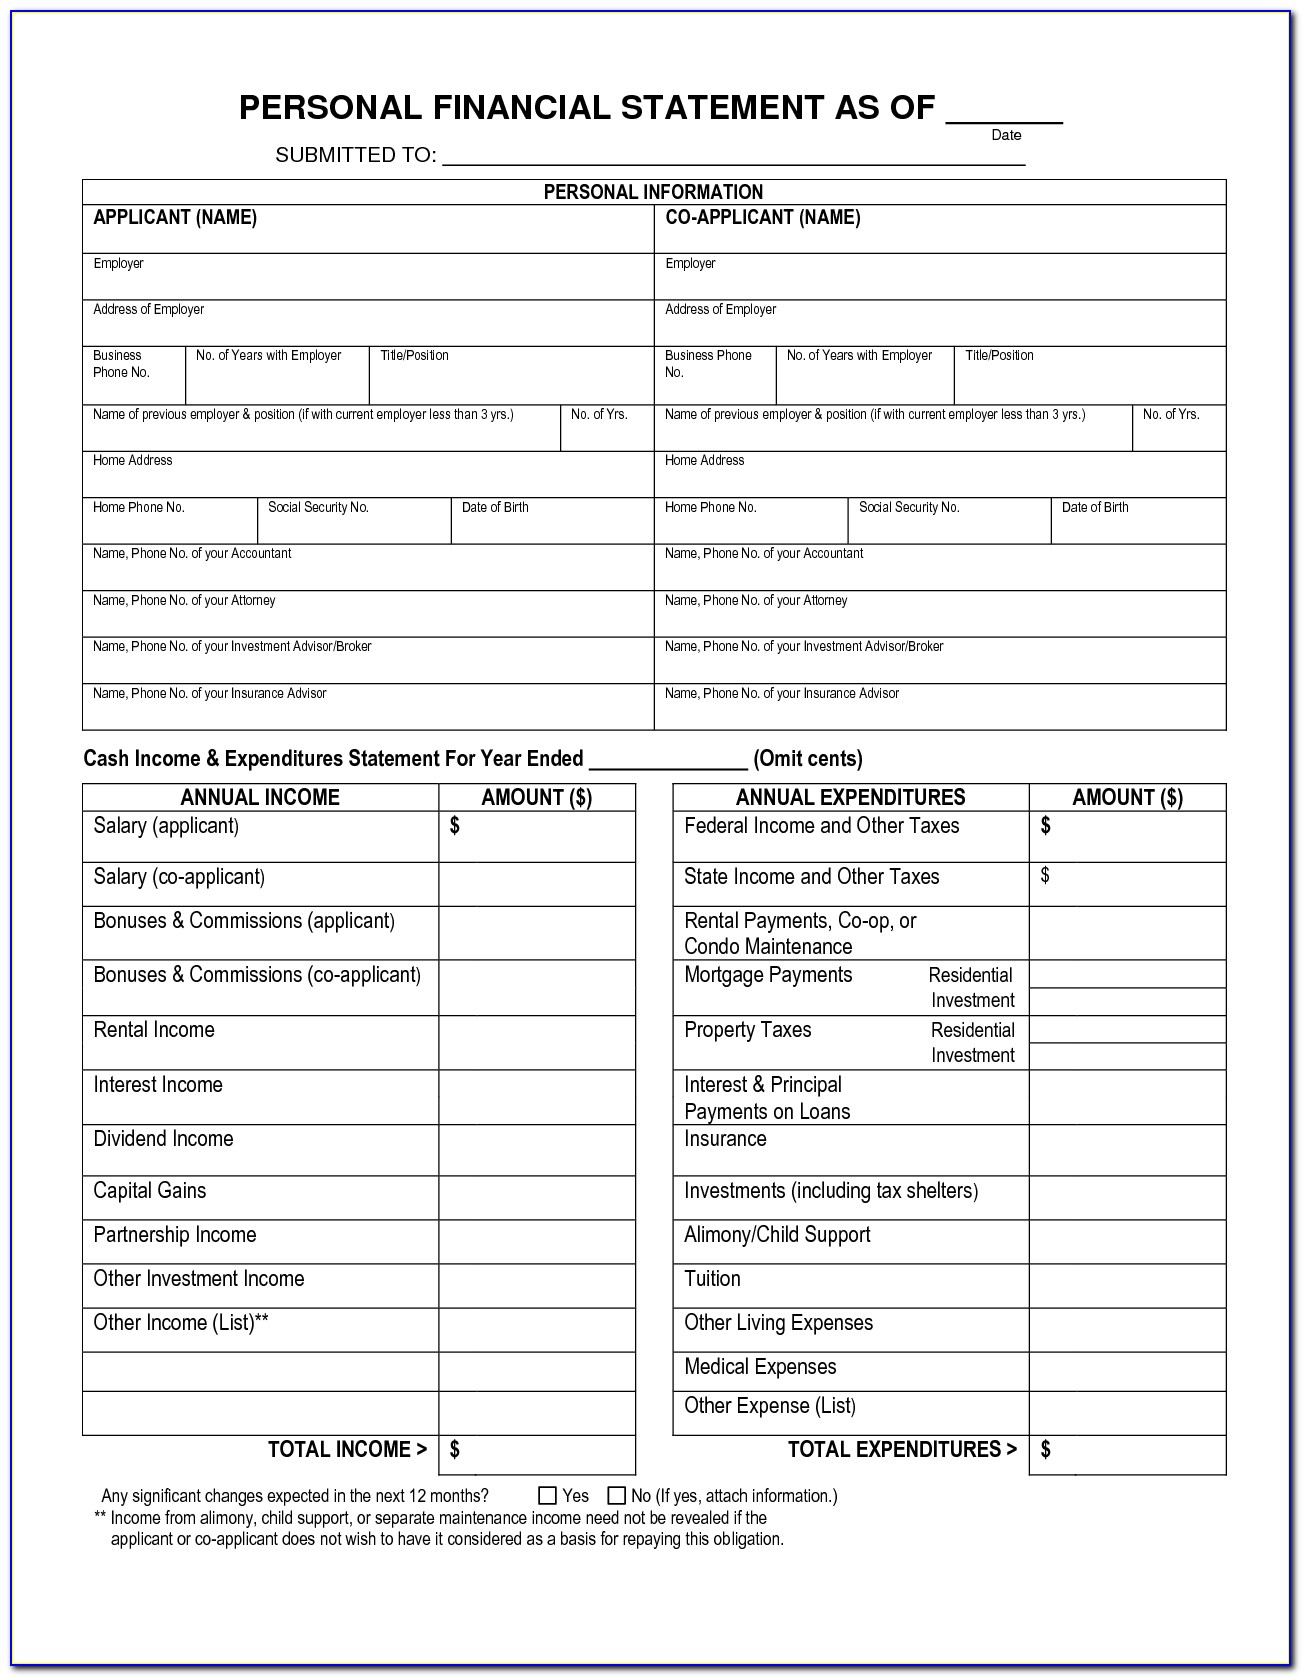 Joint Personal Financial Statement Blank Form